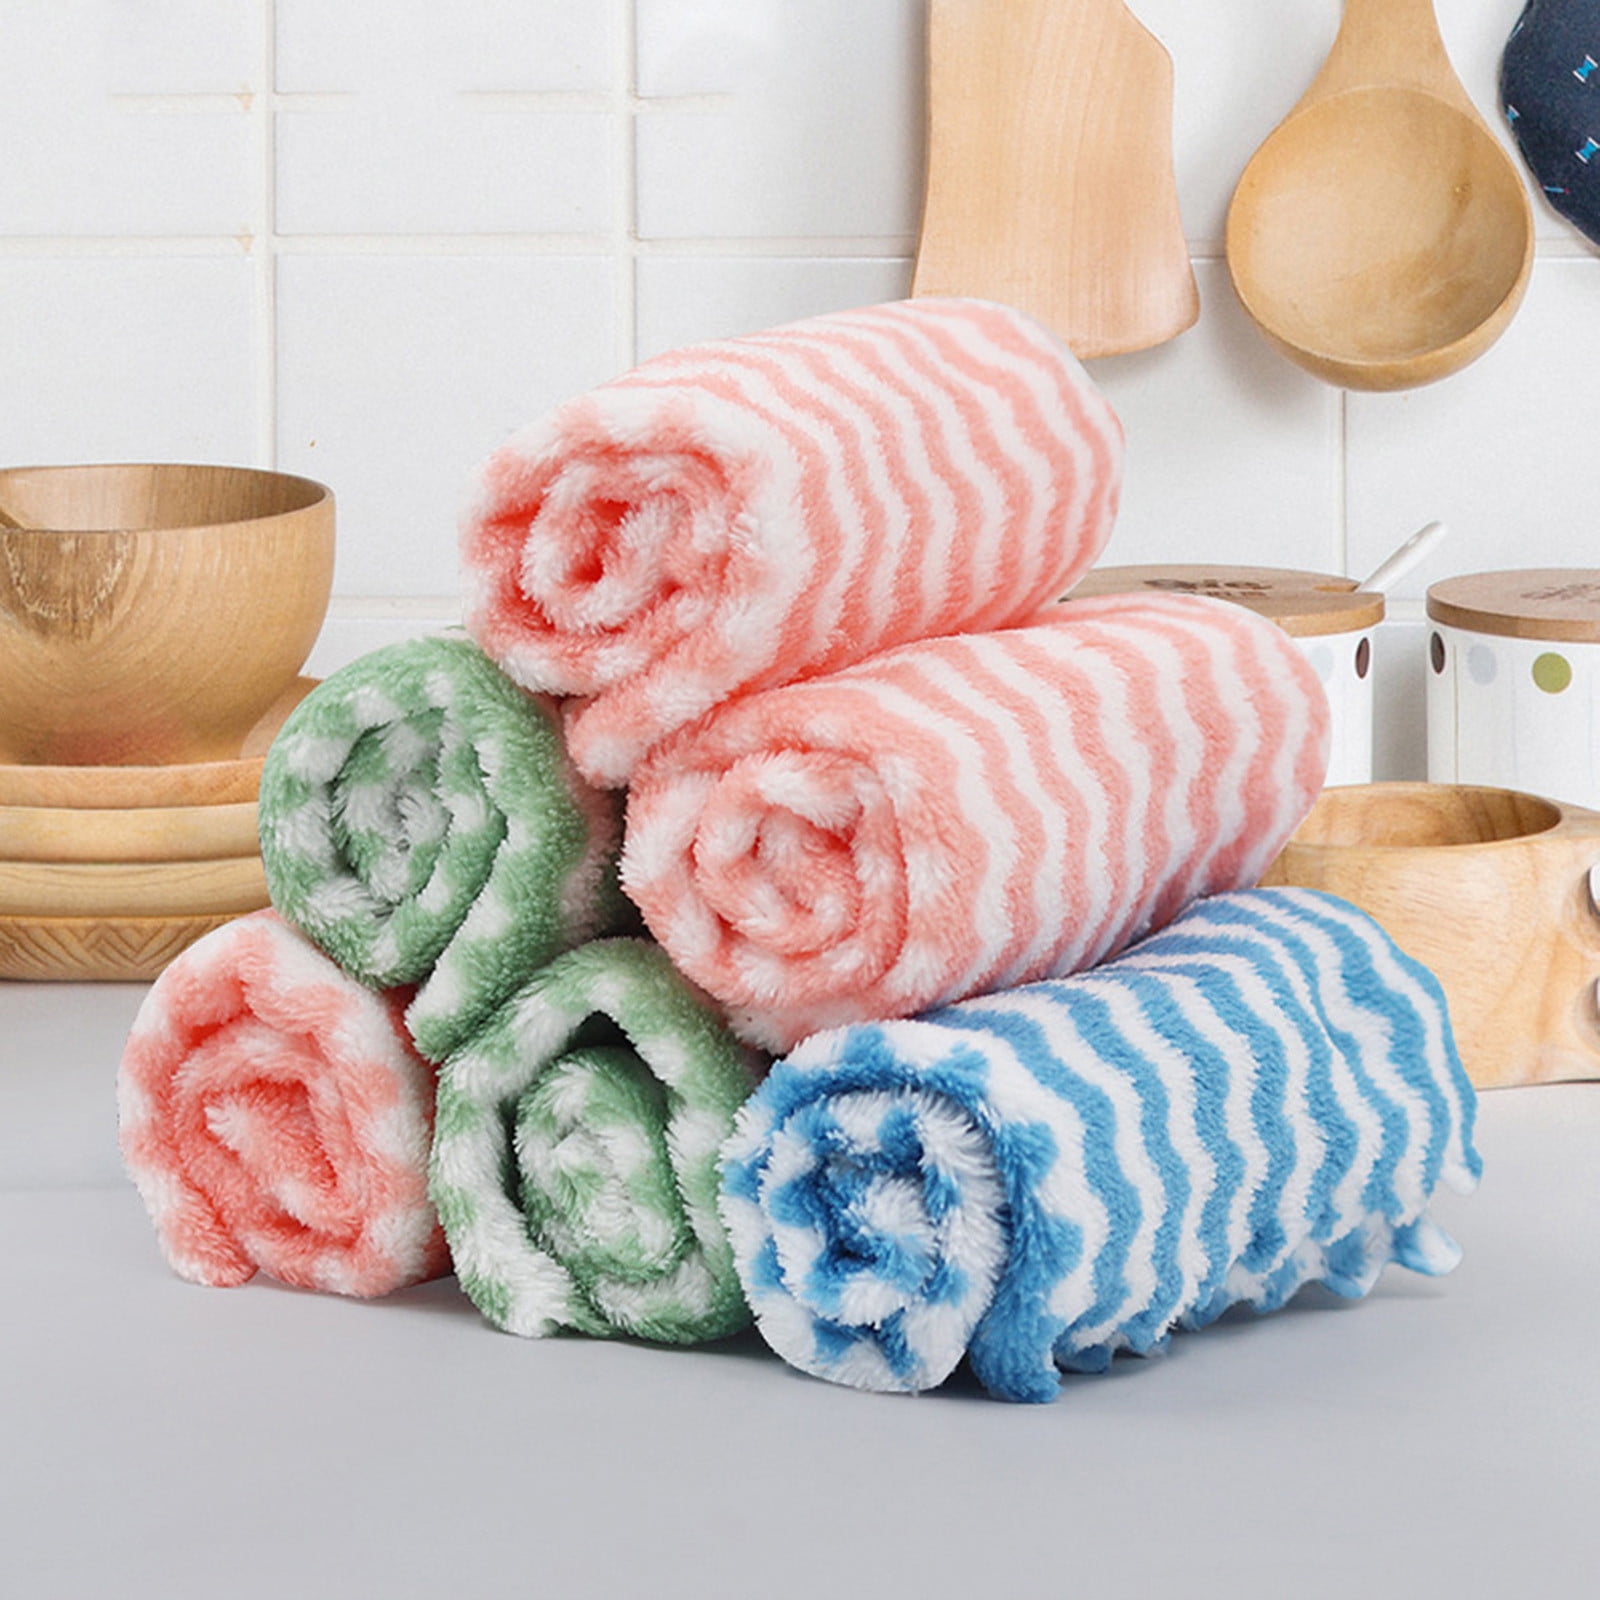 Moocorvic Kitchen Dish Cloths , Dish Rags for Washing Dishes Bamboo  Washcloths Reusable Cleaning Dishcloth Absorbent Dish Cloths & Dish Towels  for Kitchen Bathroom (12鈥?x 12鈥? 